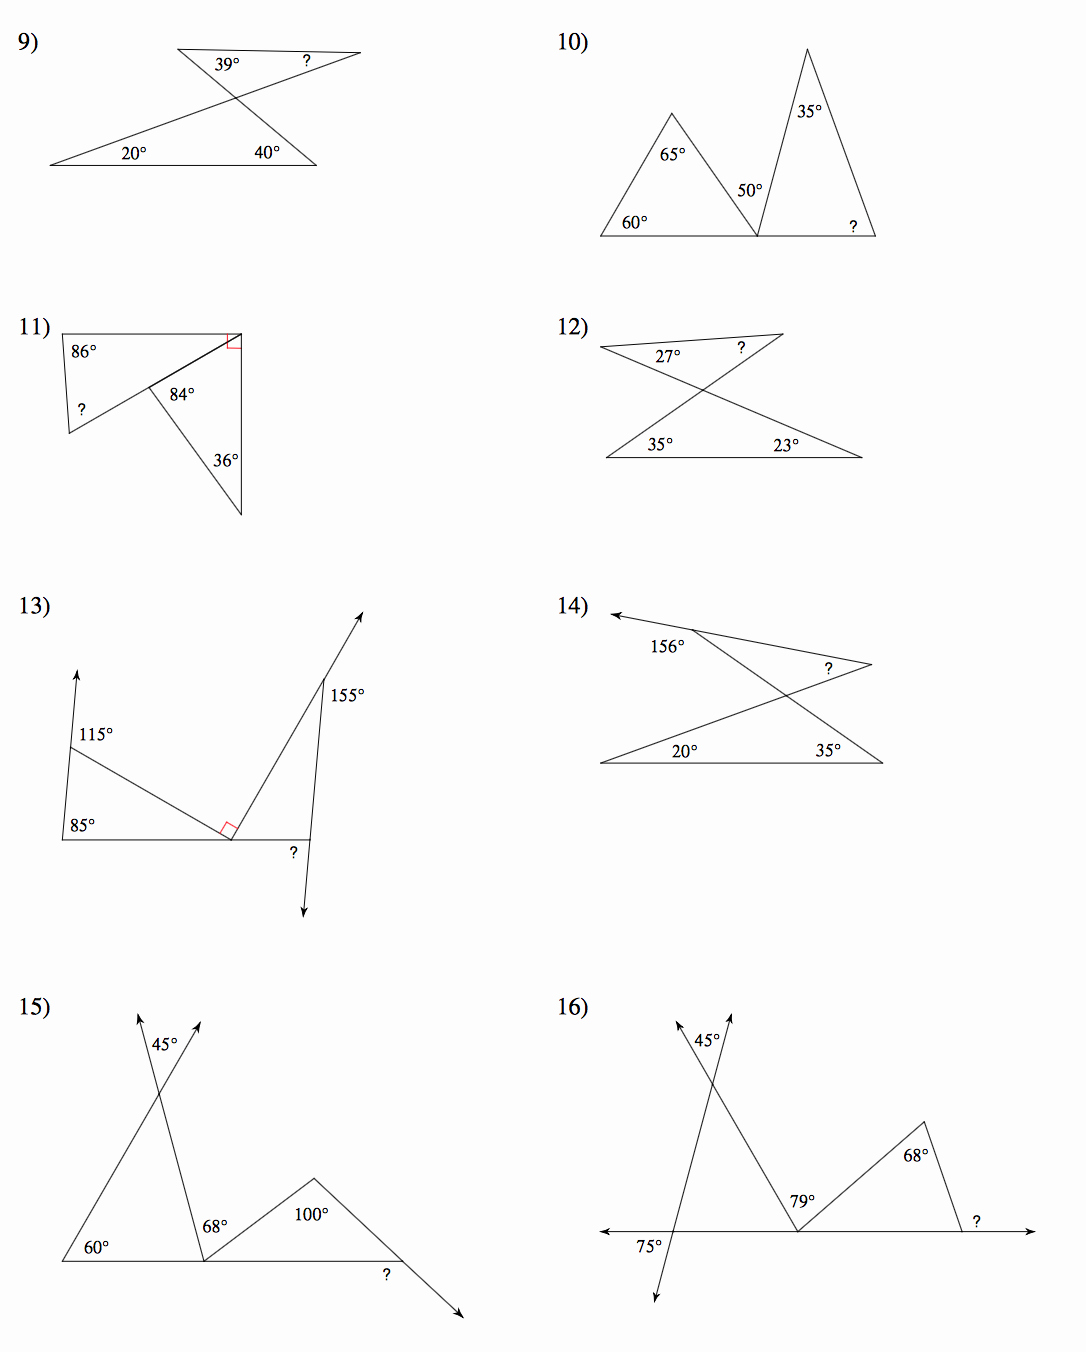 Congruent Triangles Worksheet Answer Key Fresh Geometry Worksheet Congruent Triangles Answer Key the Best